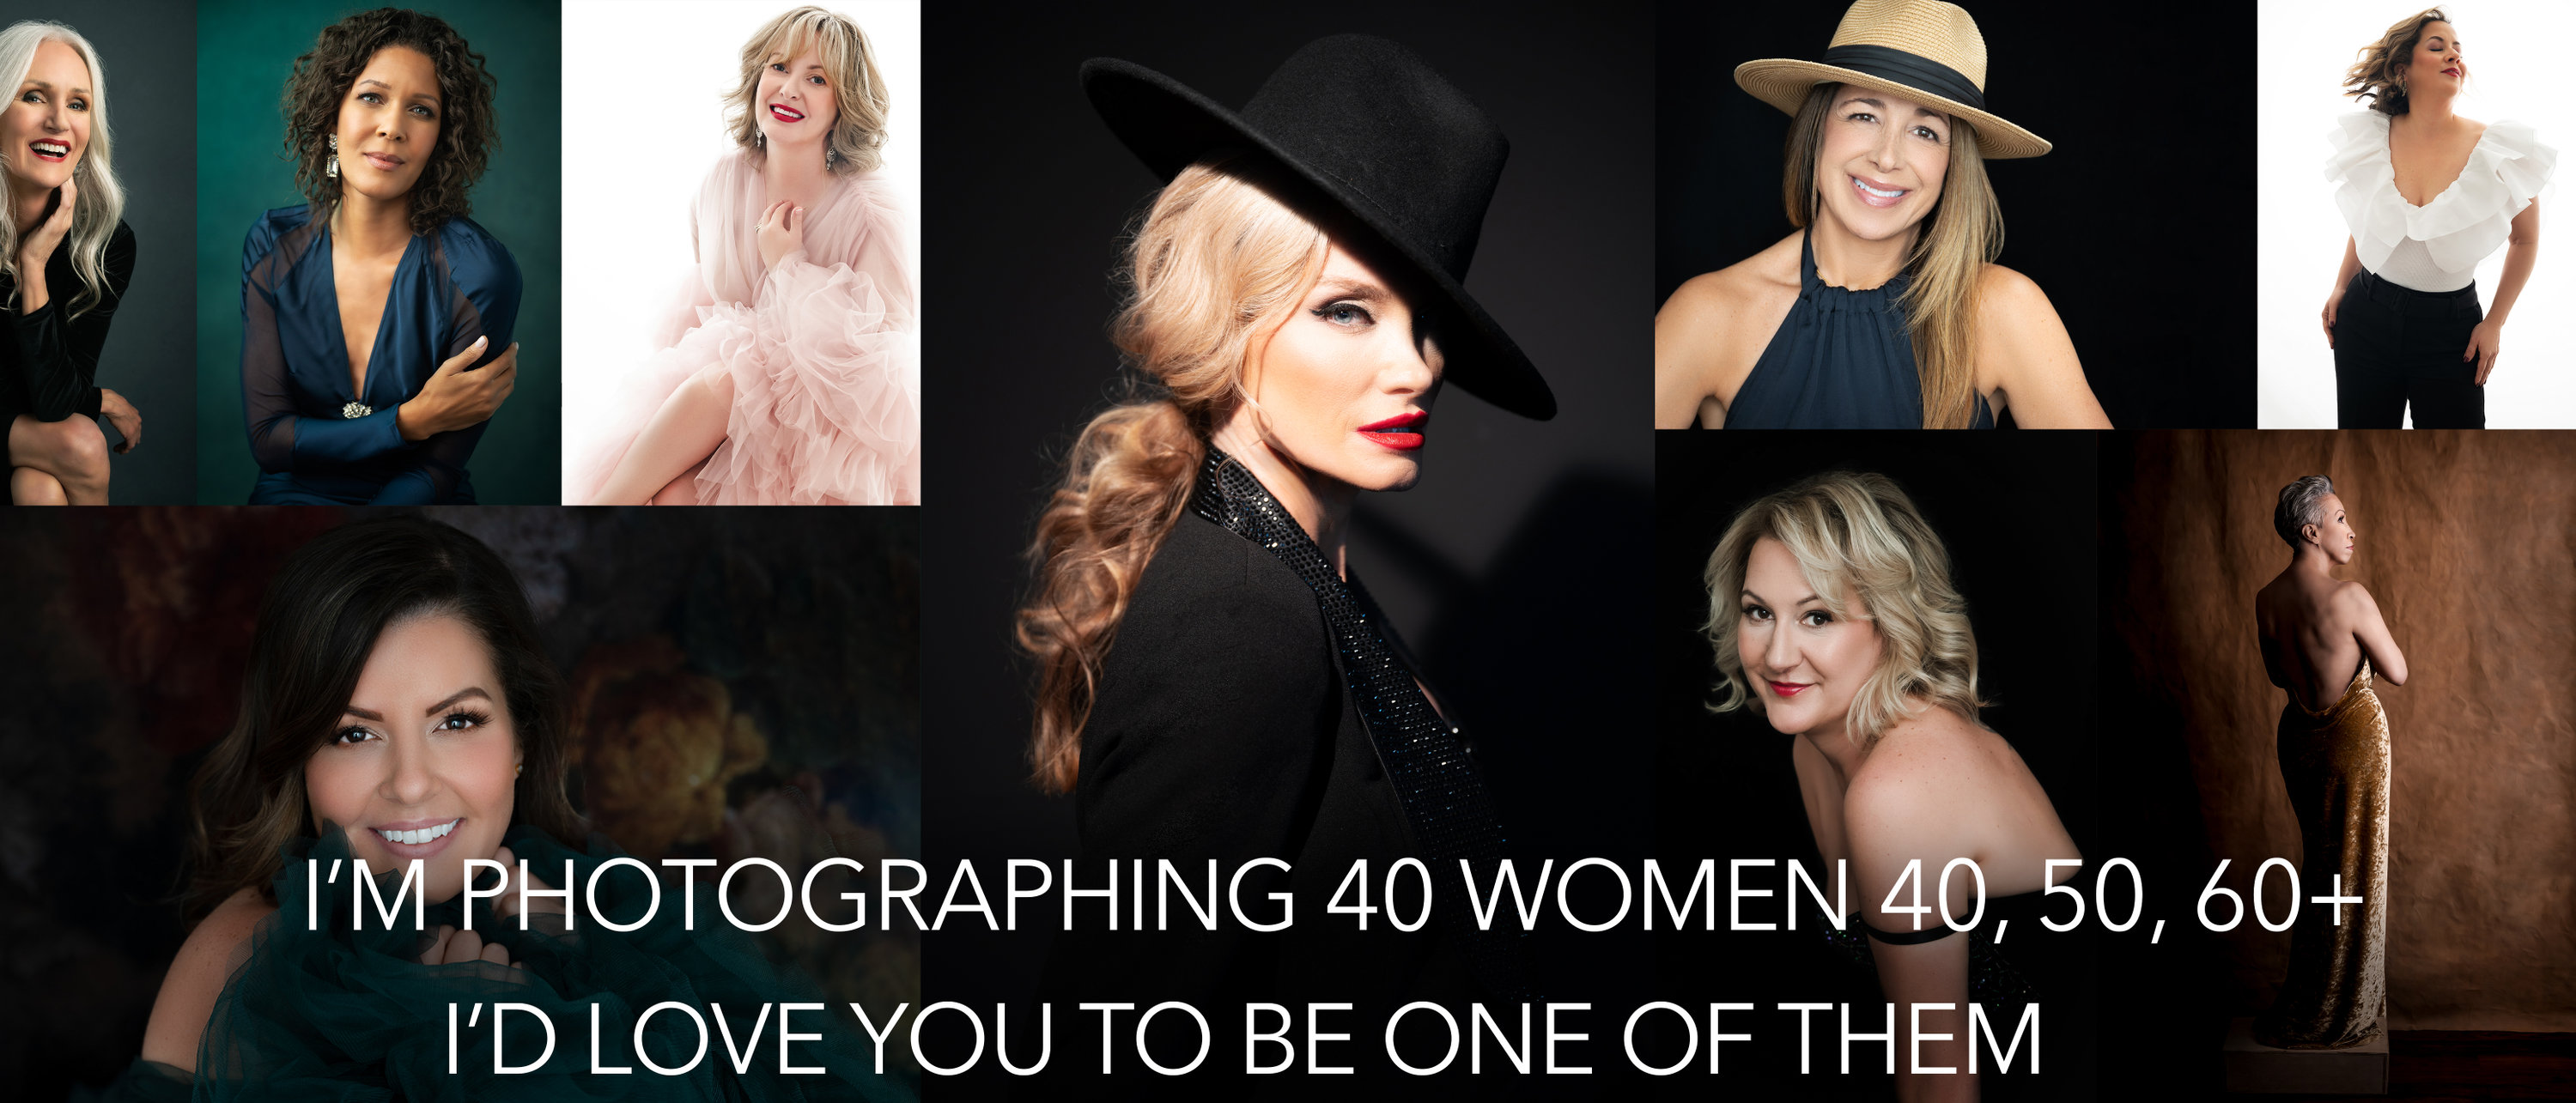 The 40 over 40 Photoshoot Experience